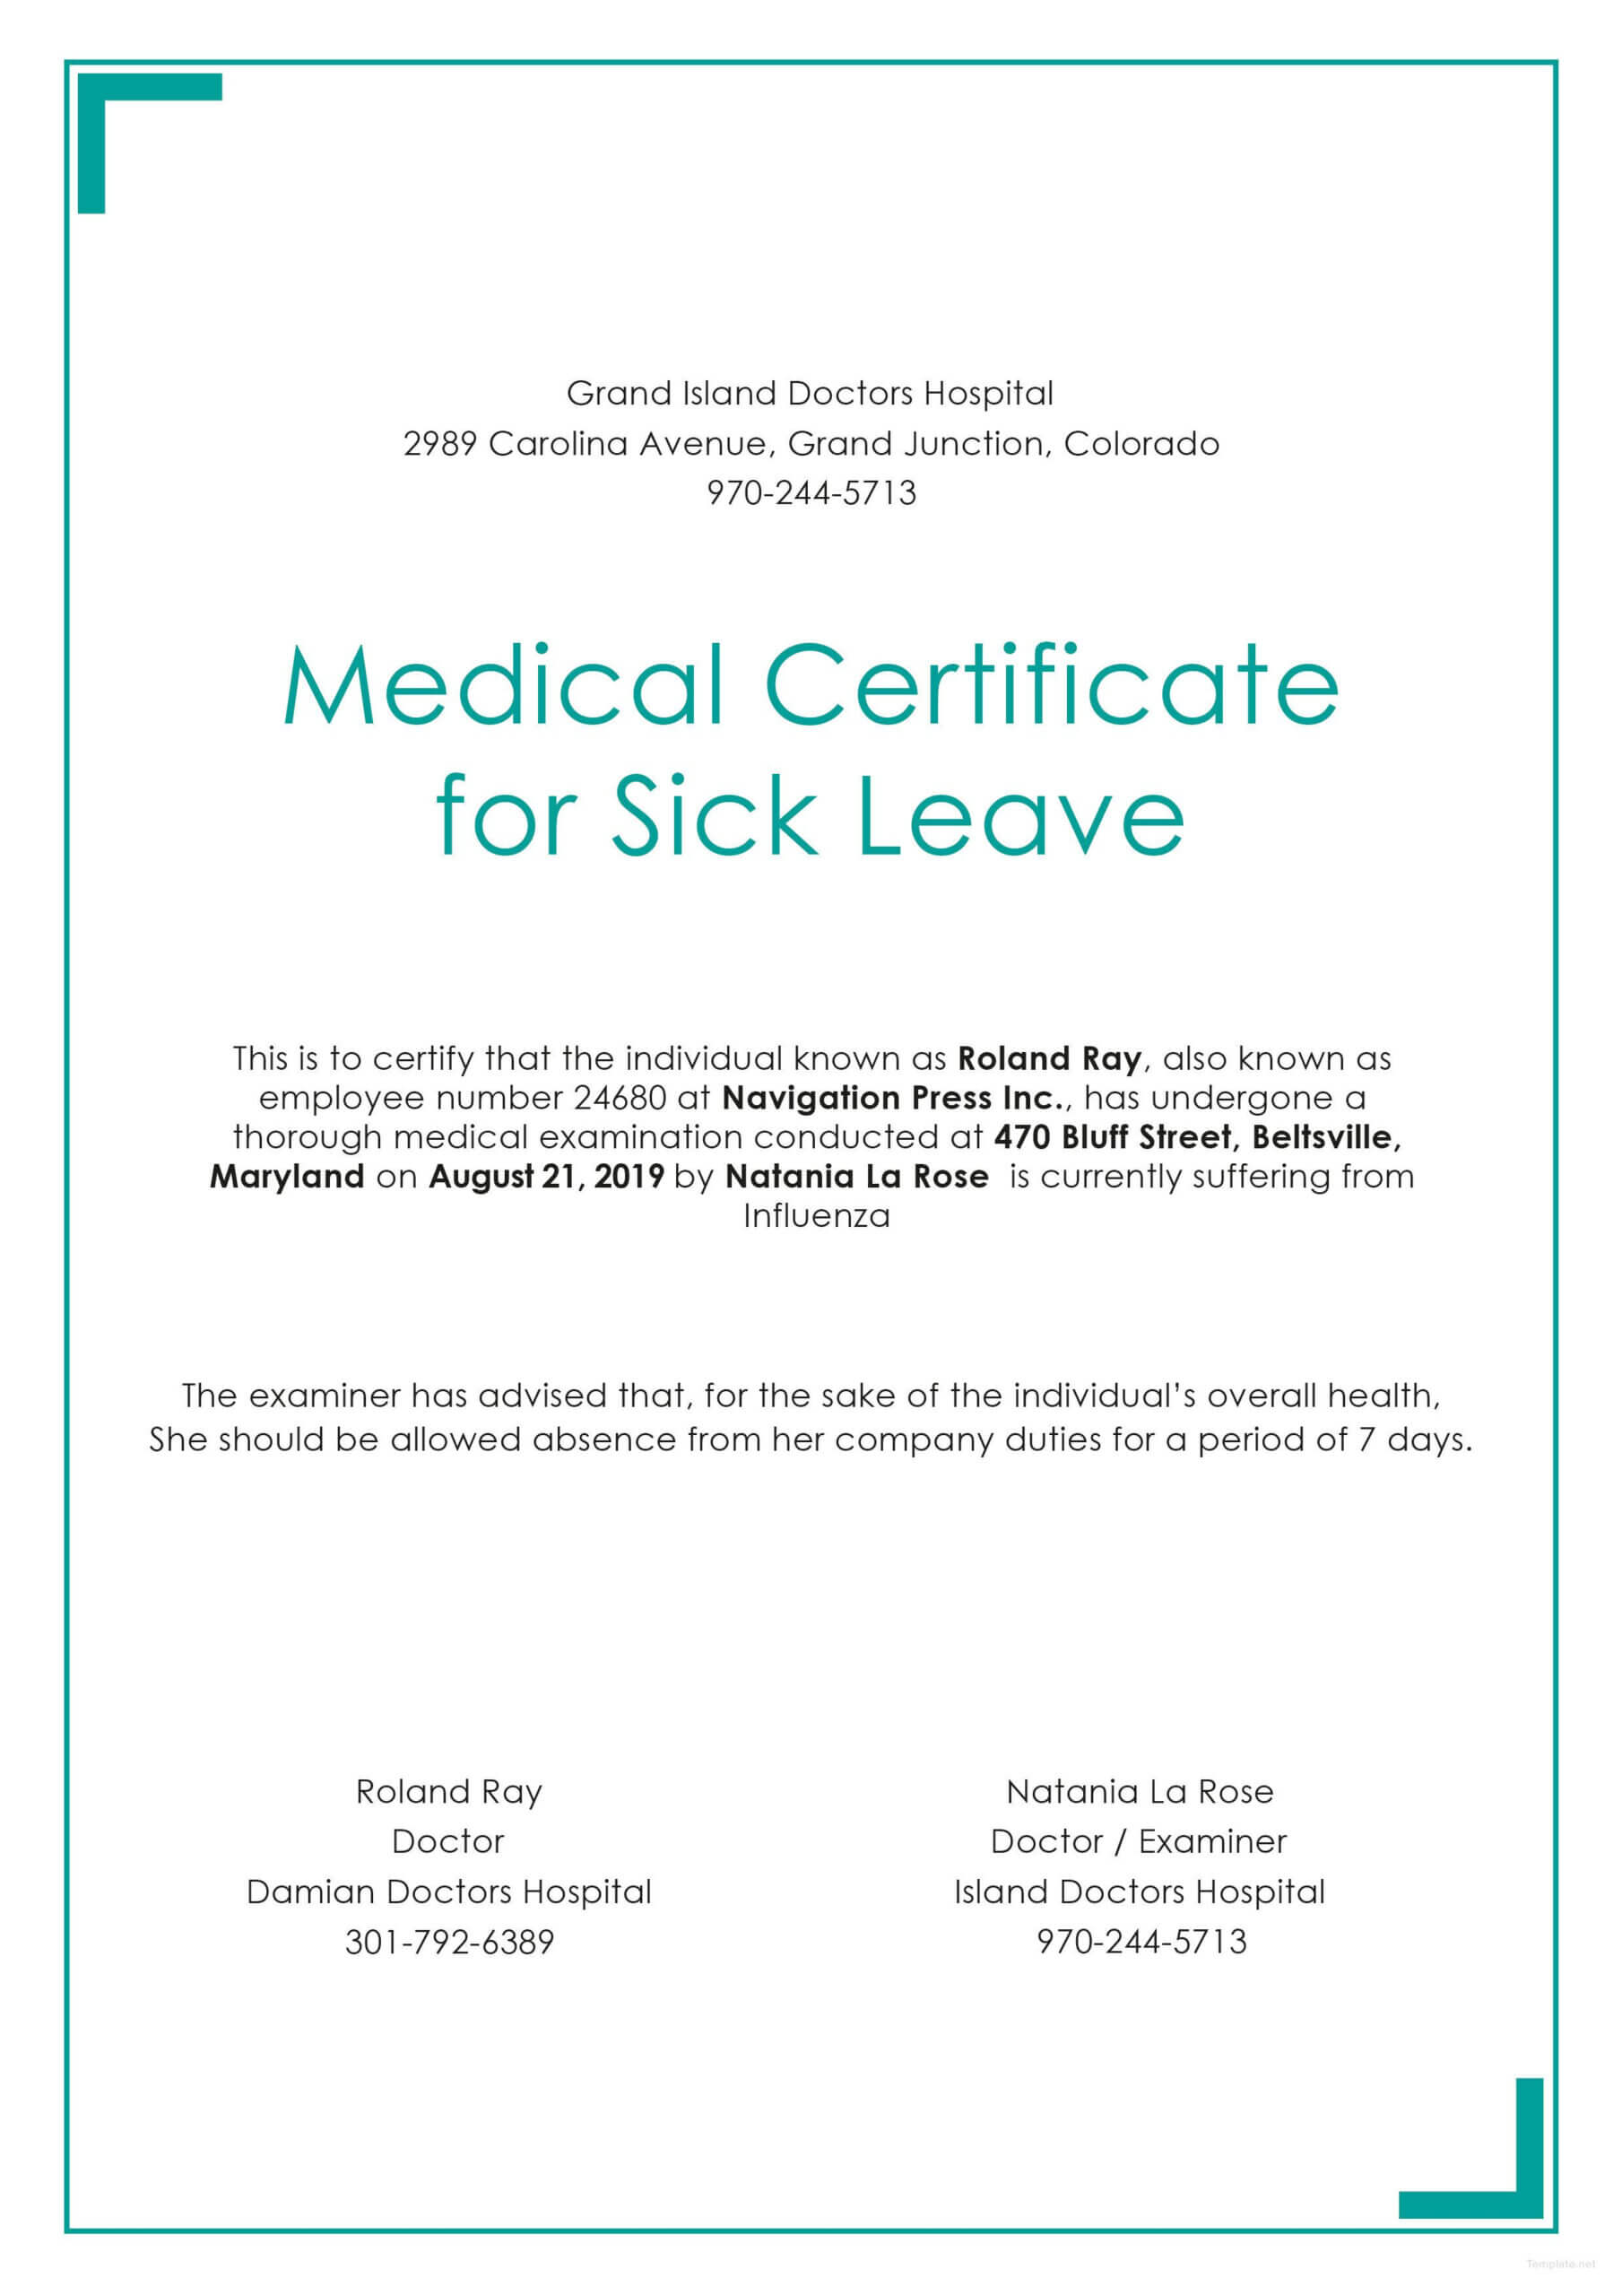 Free Medical Certificate For Sick Leave | Medical Pertaining To Certificate Of Inspection Template